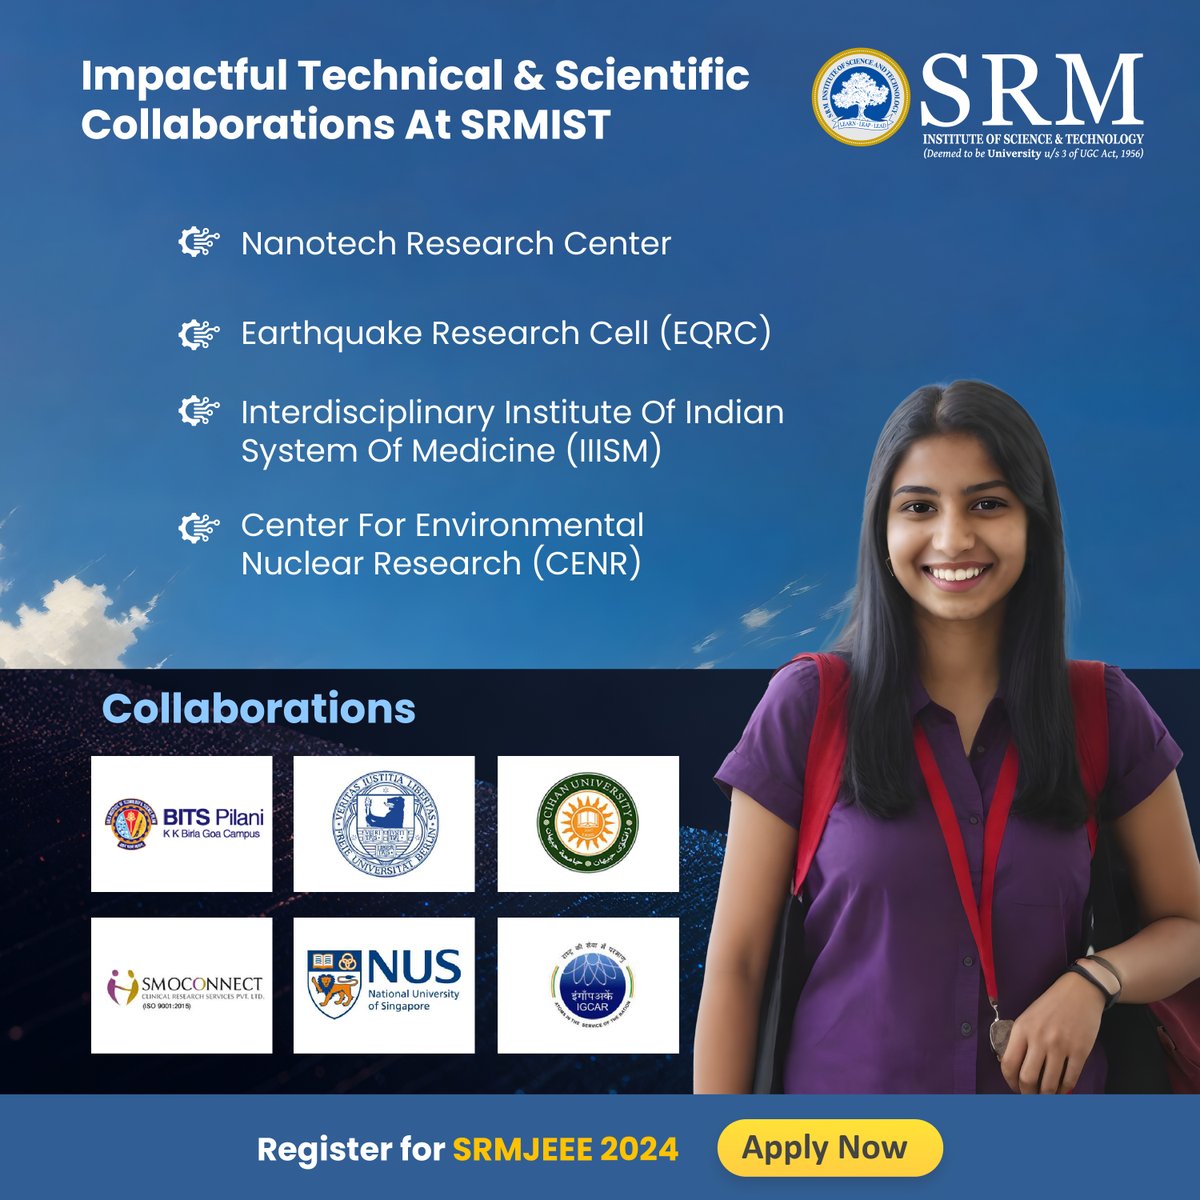 Build your technical and scientific skills and knowledge📚 at #SRMIST for your professional growth.

Applications are NOW open!

Check out bit.ly/3VB41yo to fill out your application form.

#admissions #srmuniversity #srmkattankulathur #SRM #education #placements